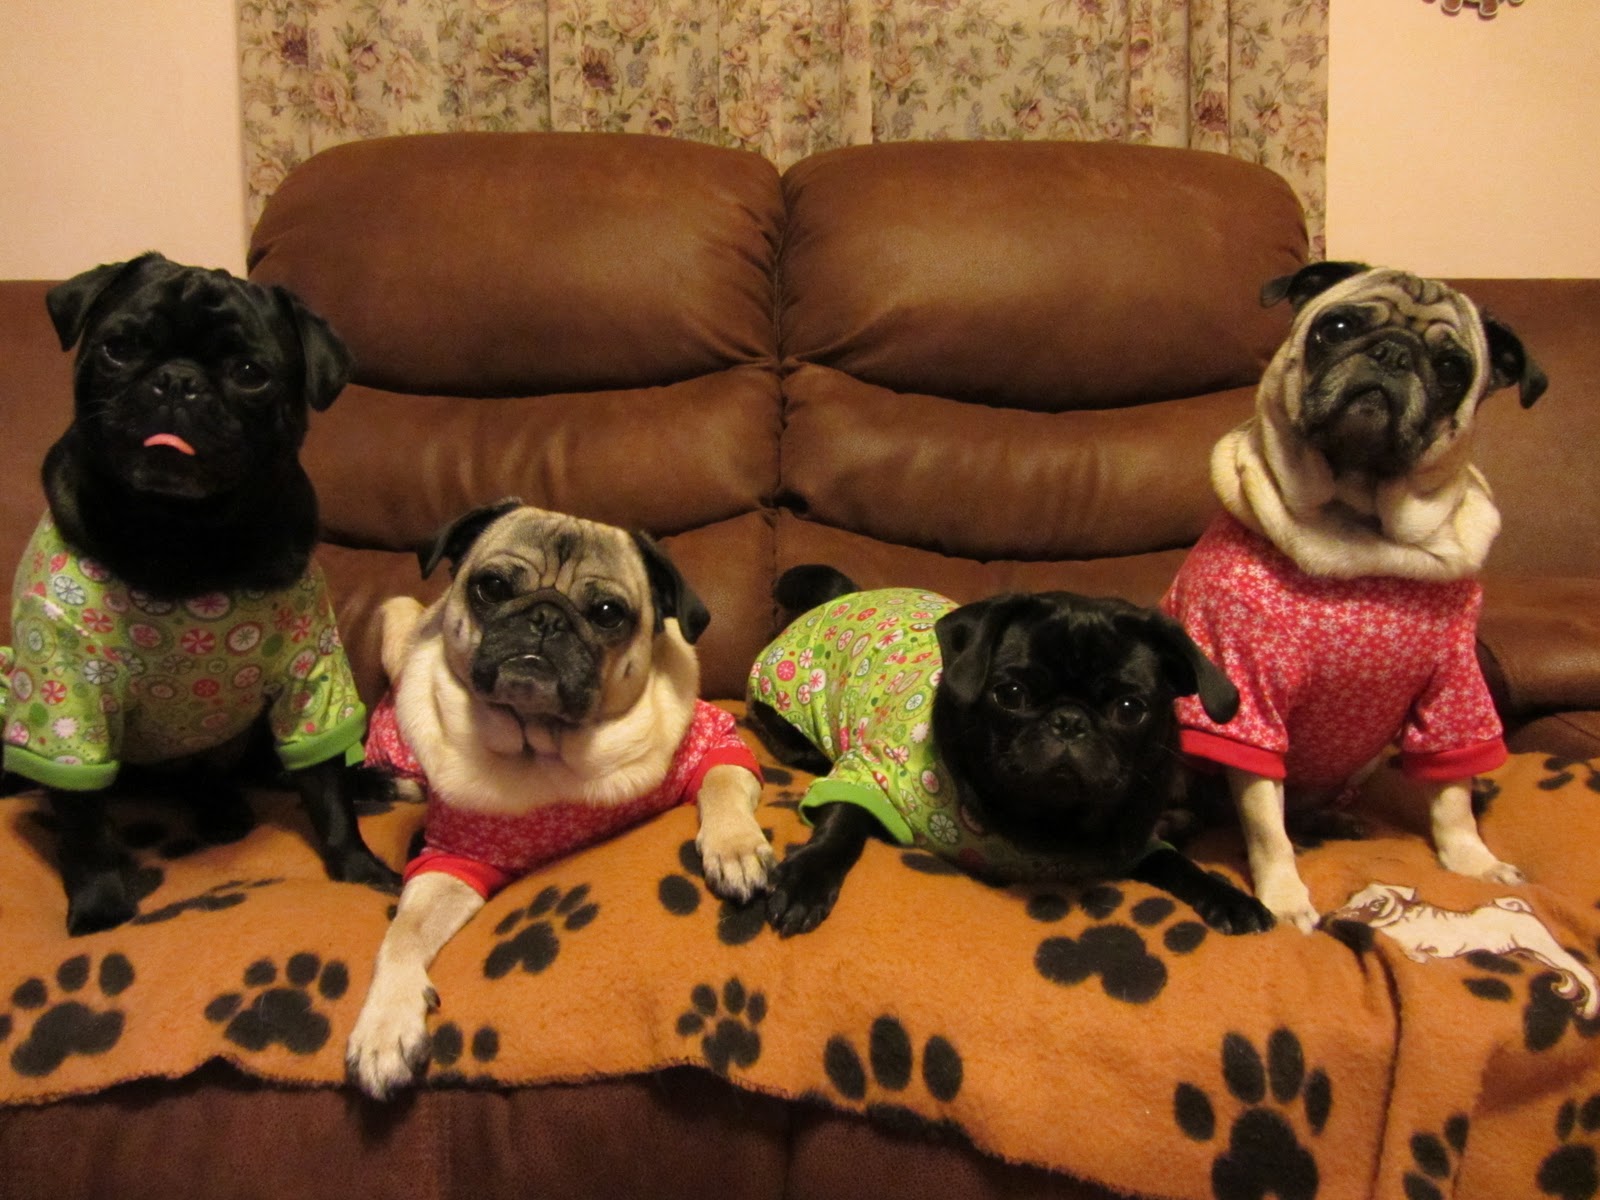 A Day in the Life of Pugs: New Christmas Pajamas